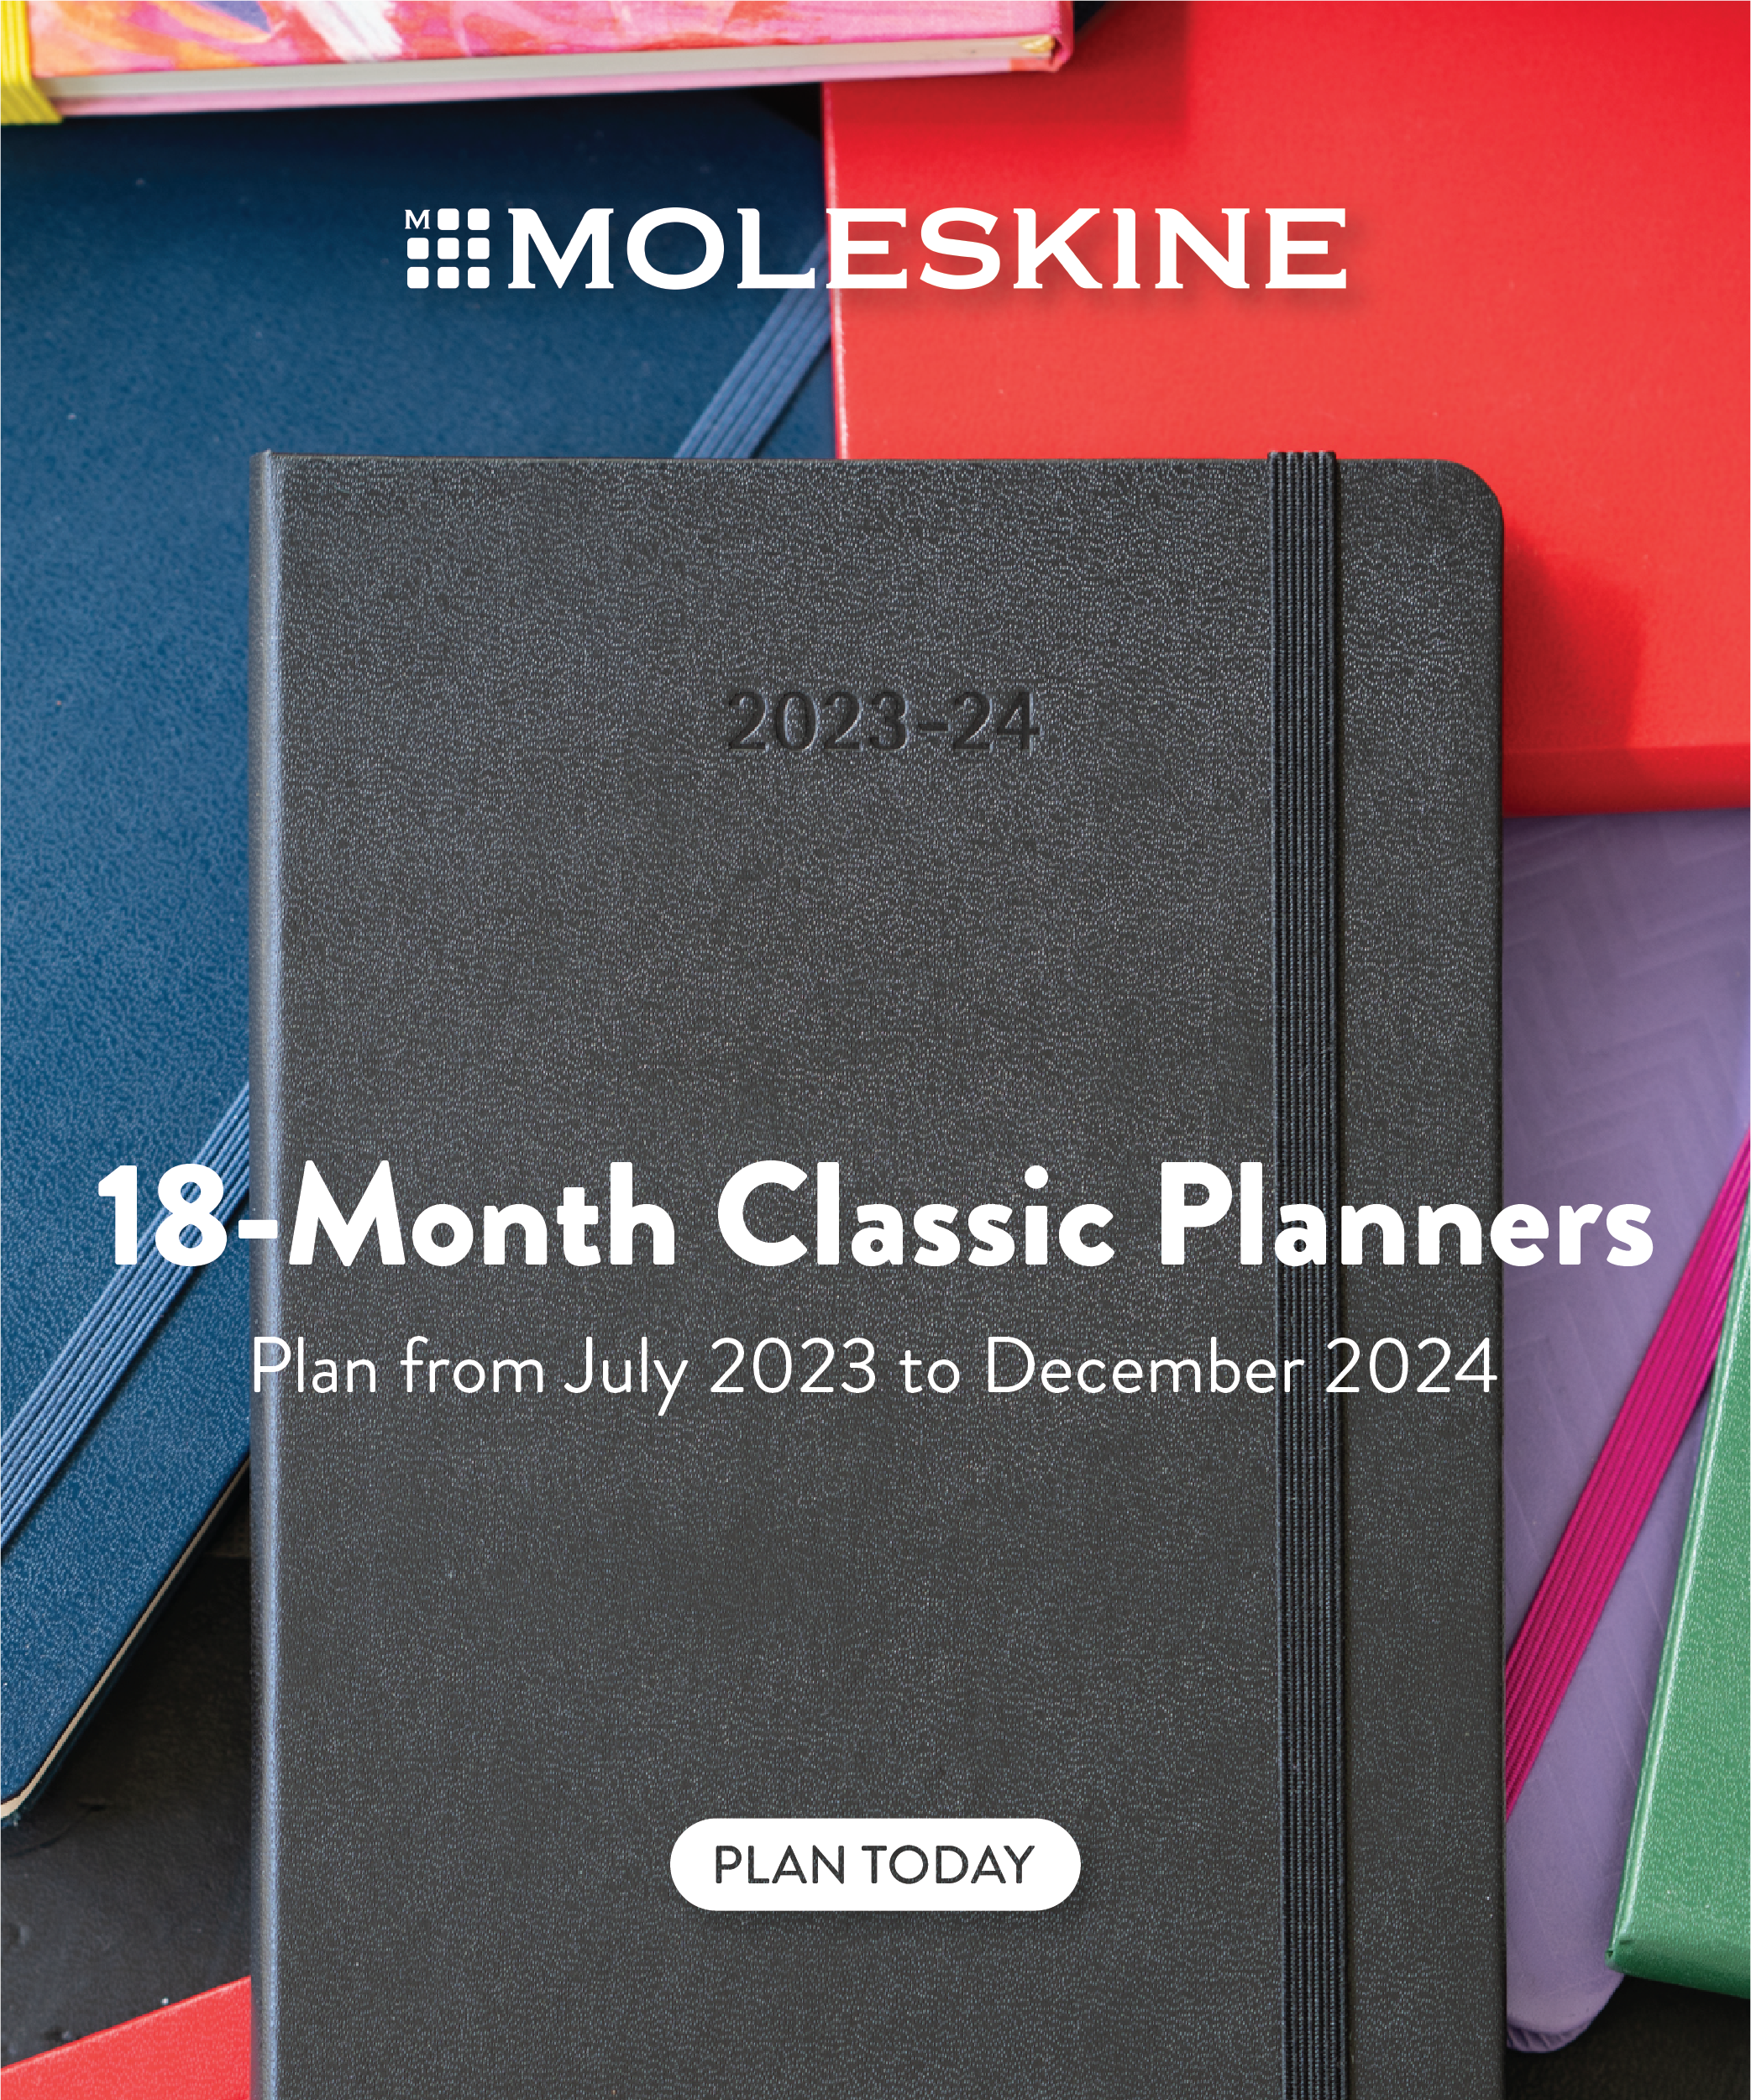 Mobile Moleskine 18-Month Classic Planners